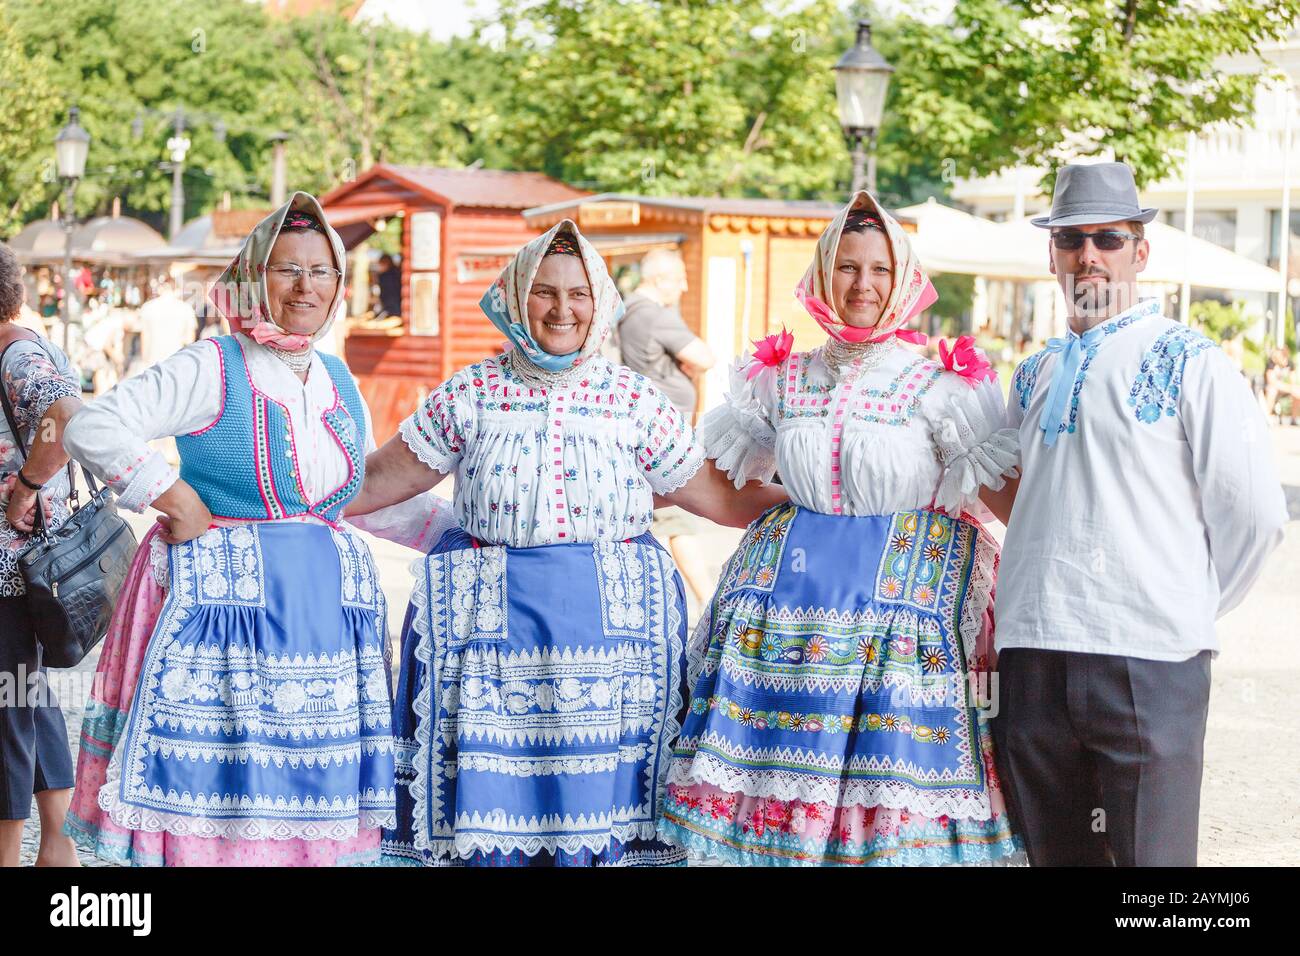 12 MAY 2018, SLOVAKIA, BRATISLAVA: People dressed in national Slovak and  Eastern European costumes take part in the folklore festival in Bratislava  Stock Photo - Alamy